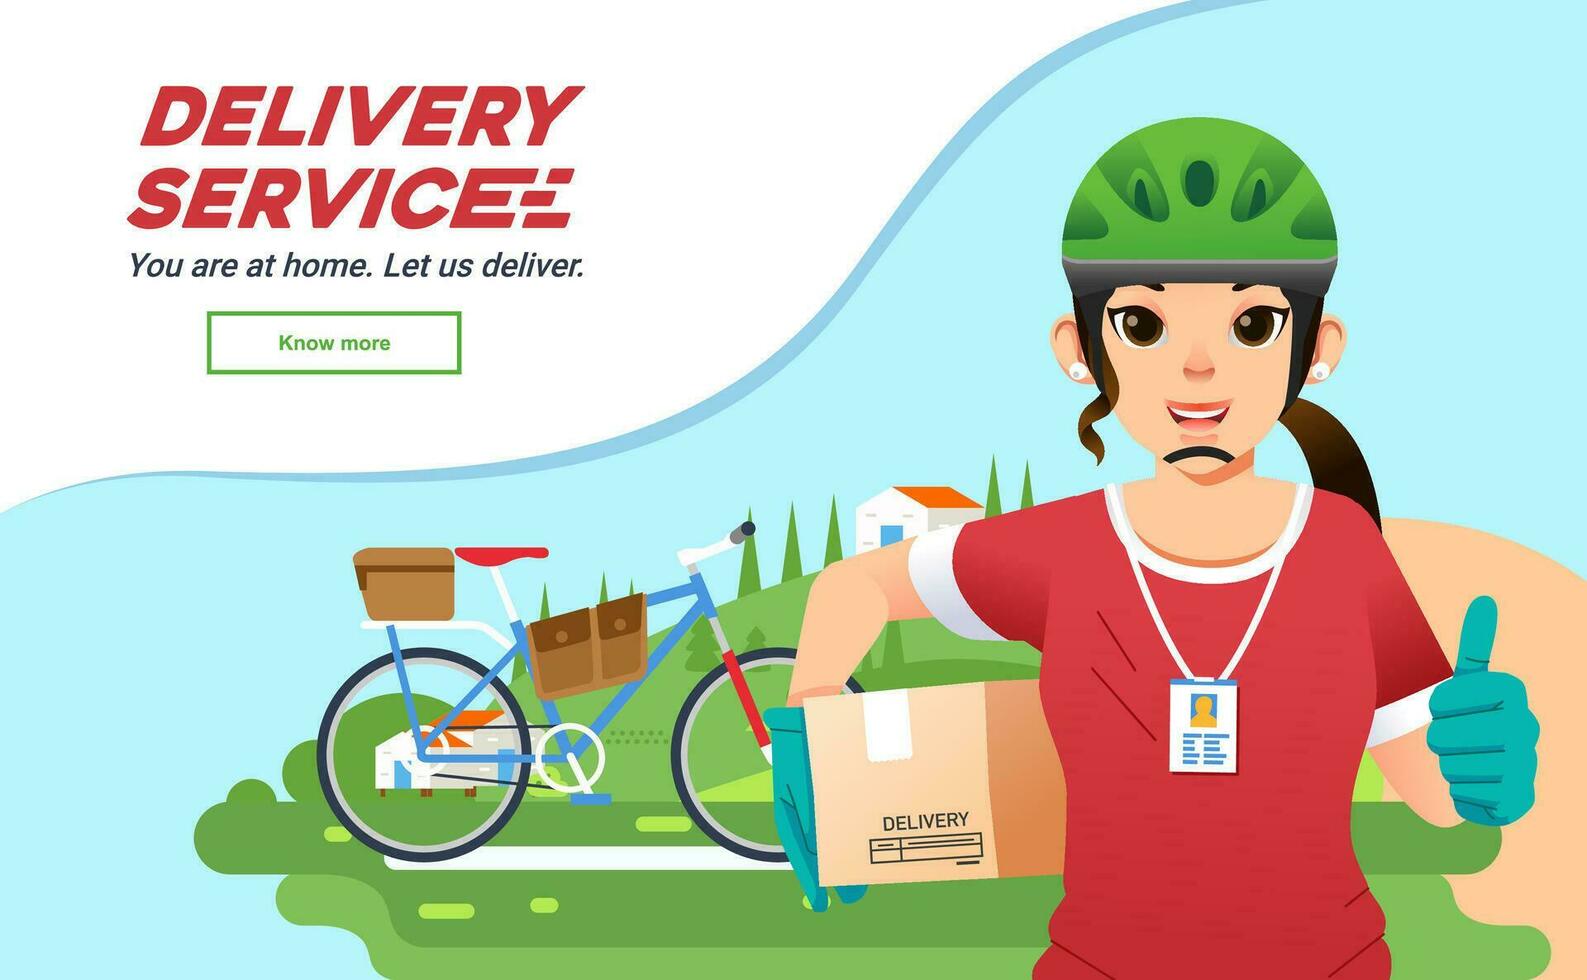 deliverry service courrier girl sending package with bysicle, women deliverry company mascot with landscape as background vector illustration